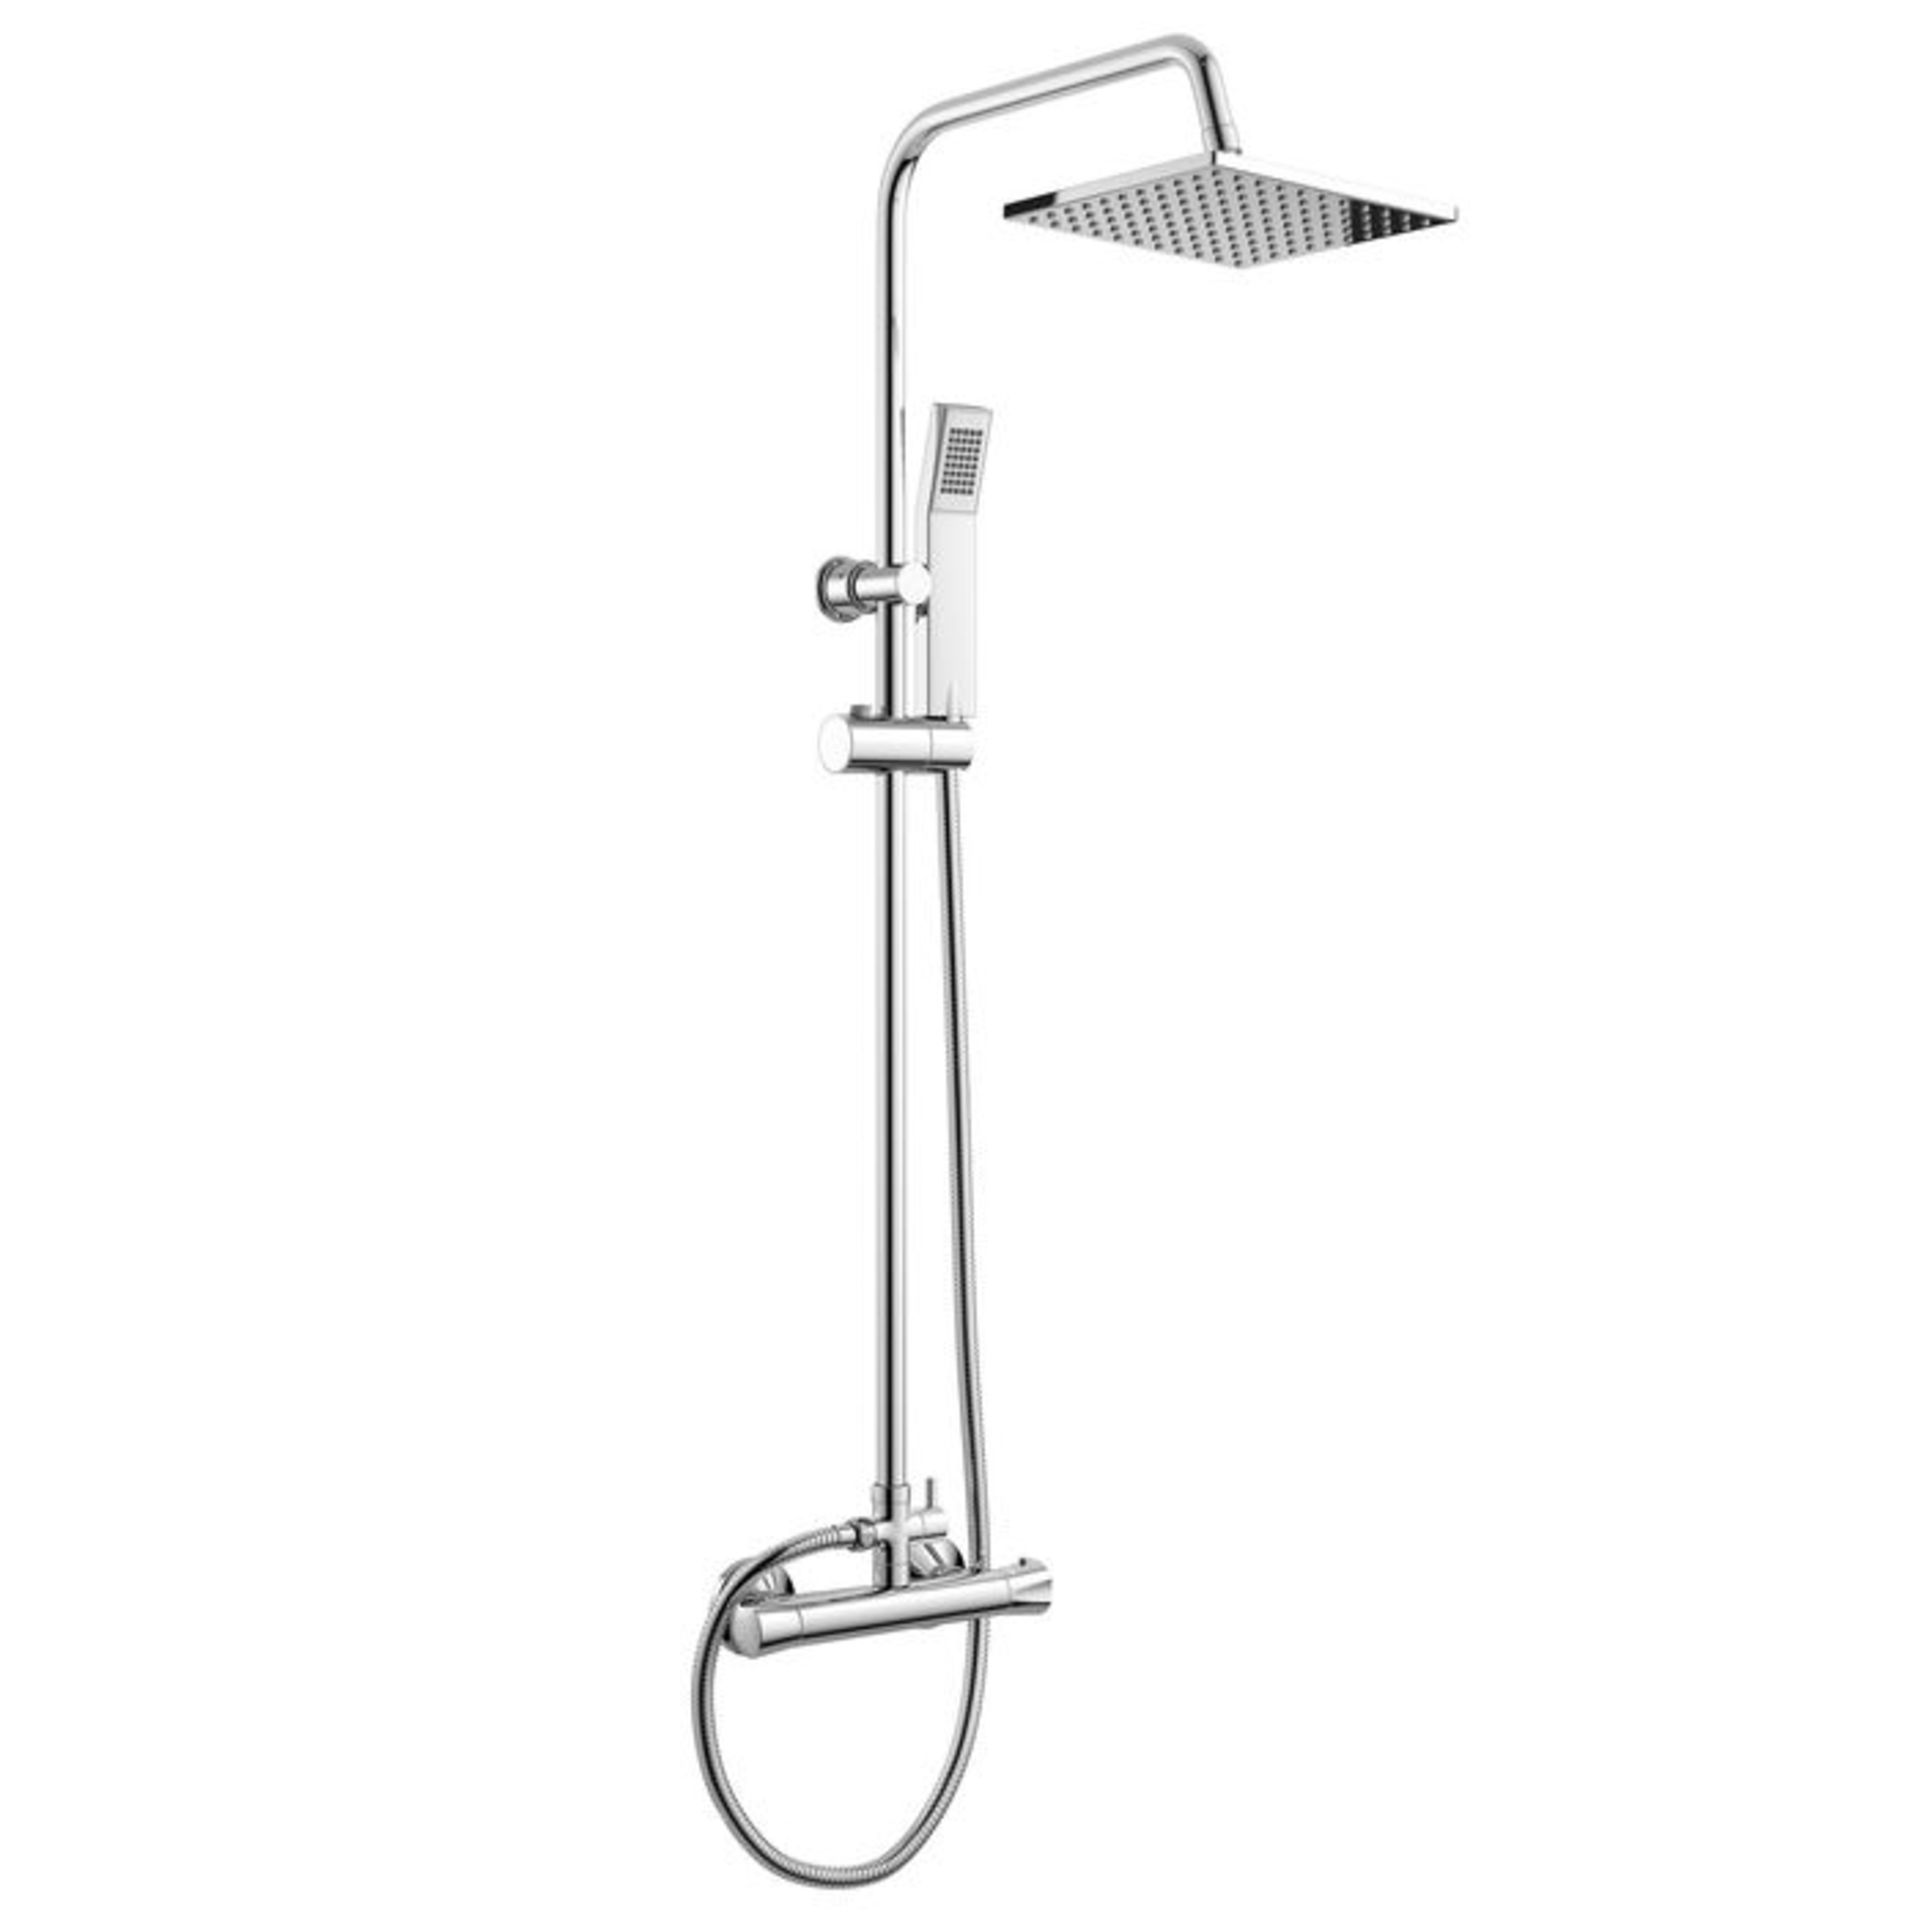 (SM2) Square Exposed Thermostatic Shower Kit & Head. Curved features and contemporary rounded valves